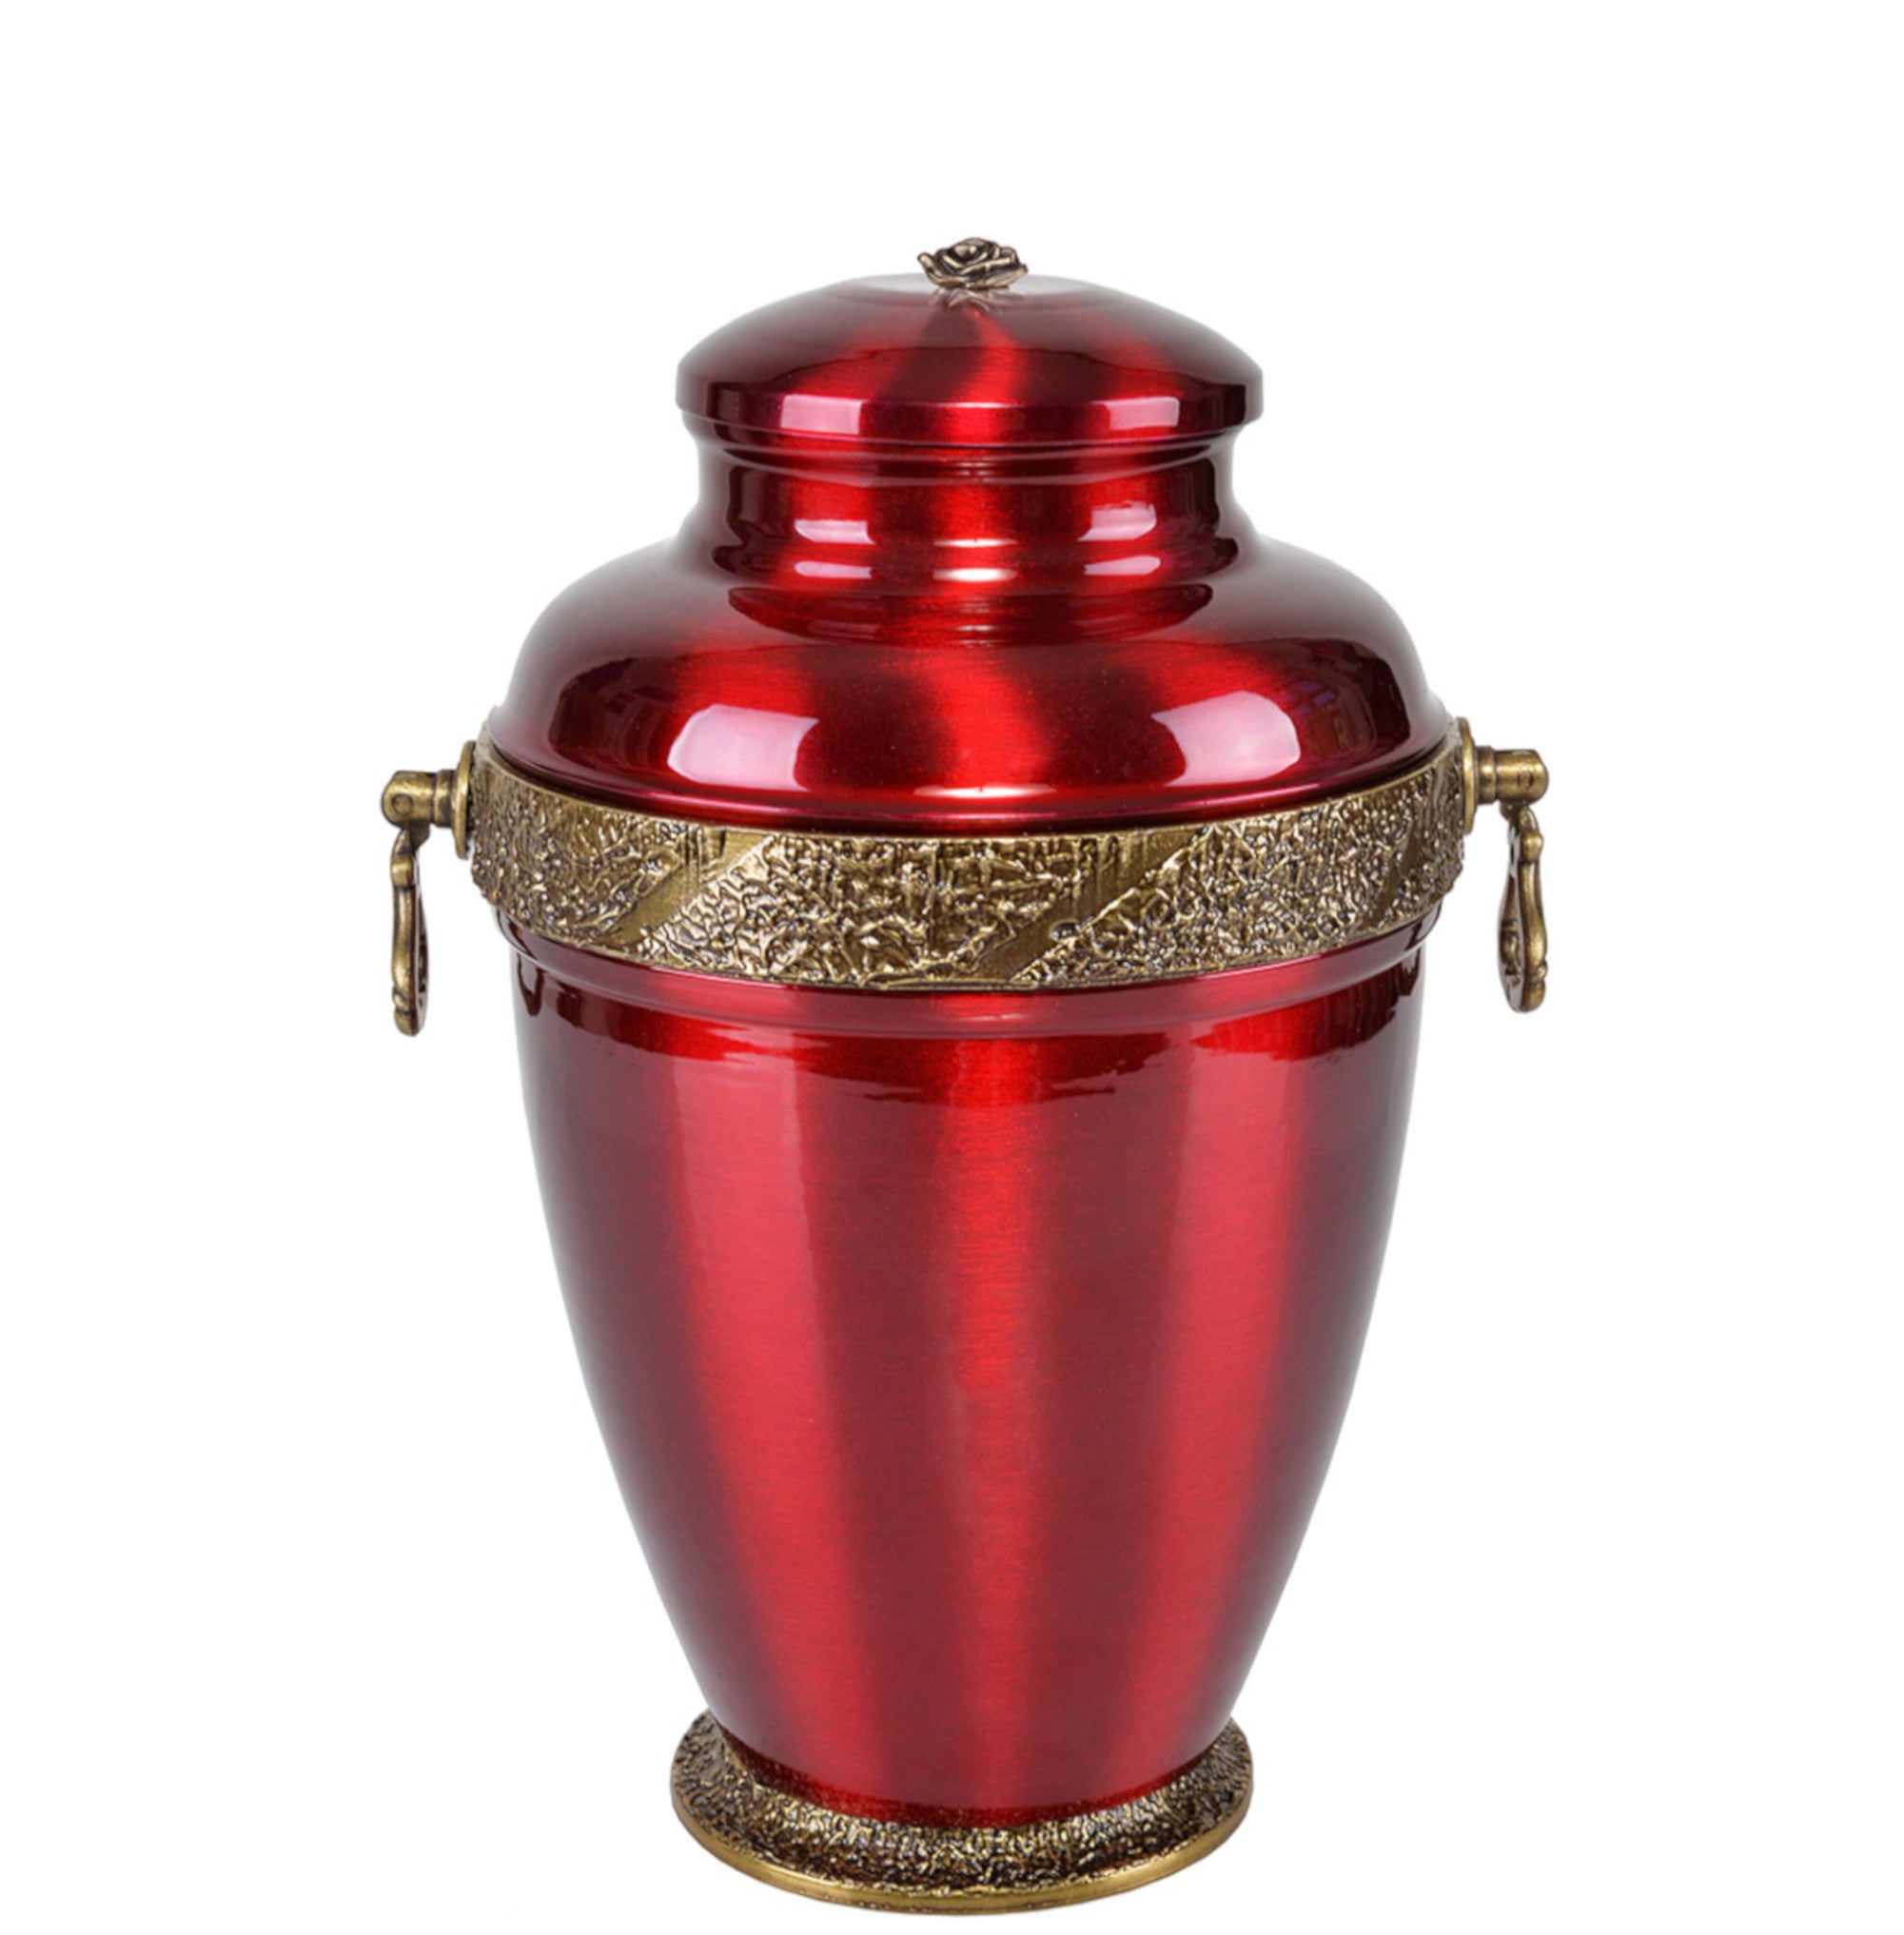 RED METAL CREMATION ADULT ASHES URN 